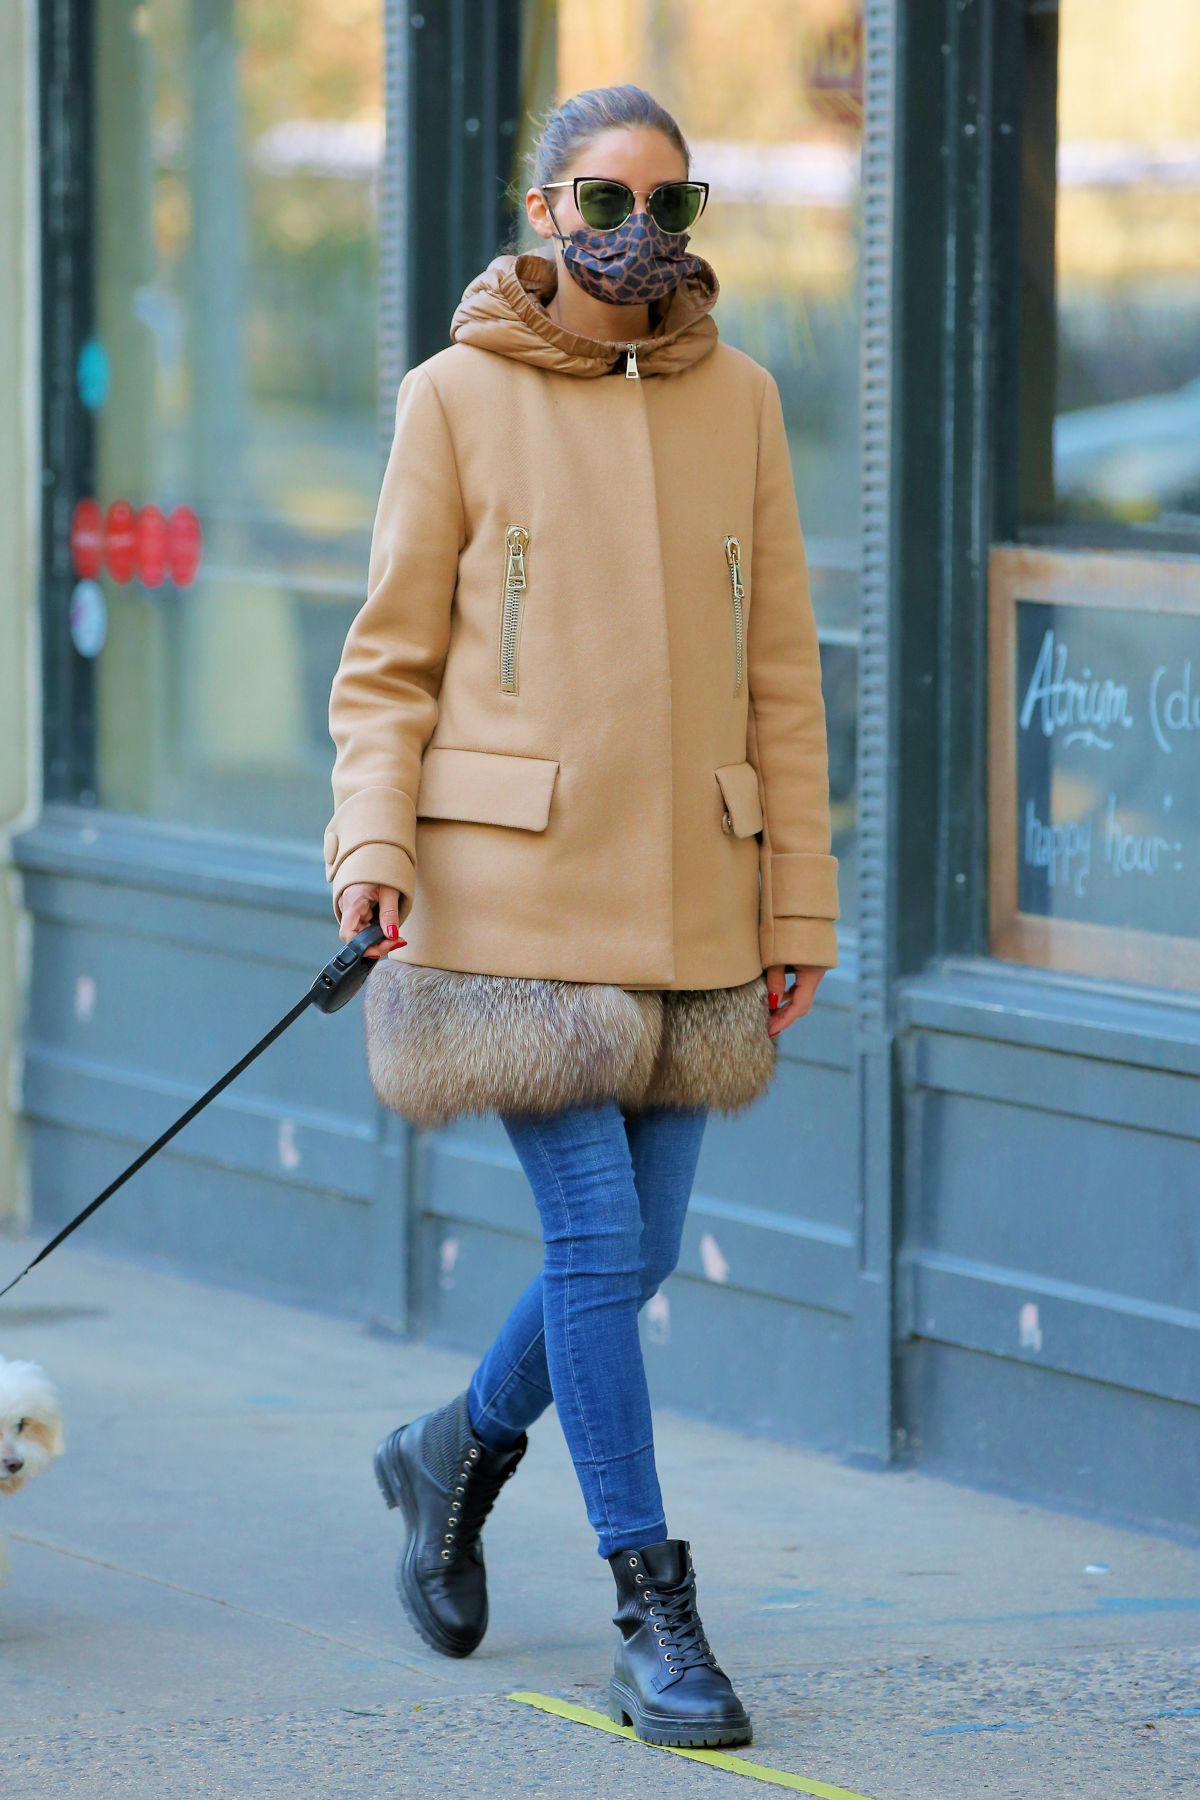 olivia-palermo-out-with-her-dog-mr.-butler-in-new-york-12-28-2020-2.jpg